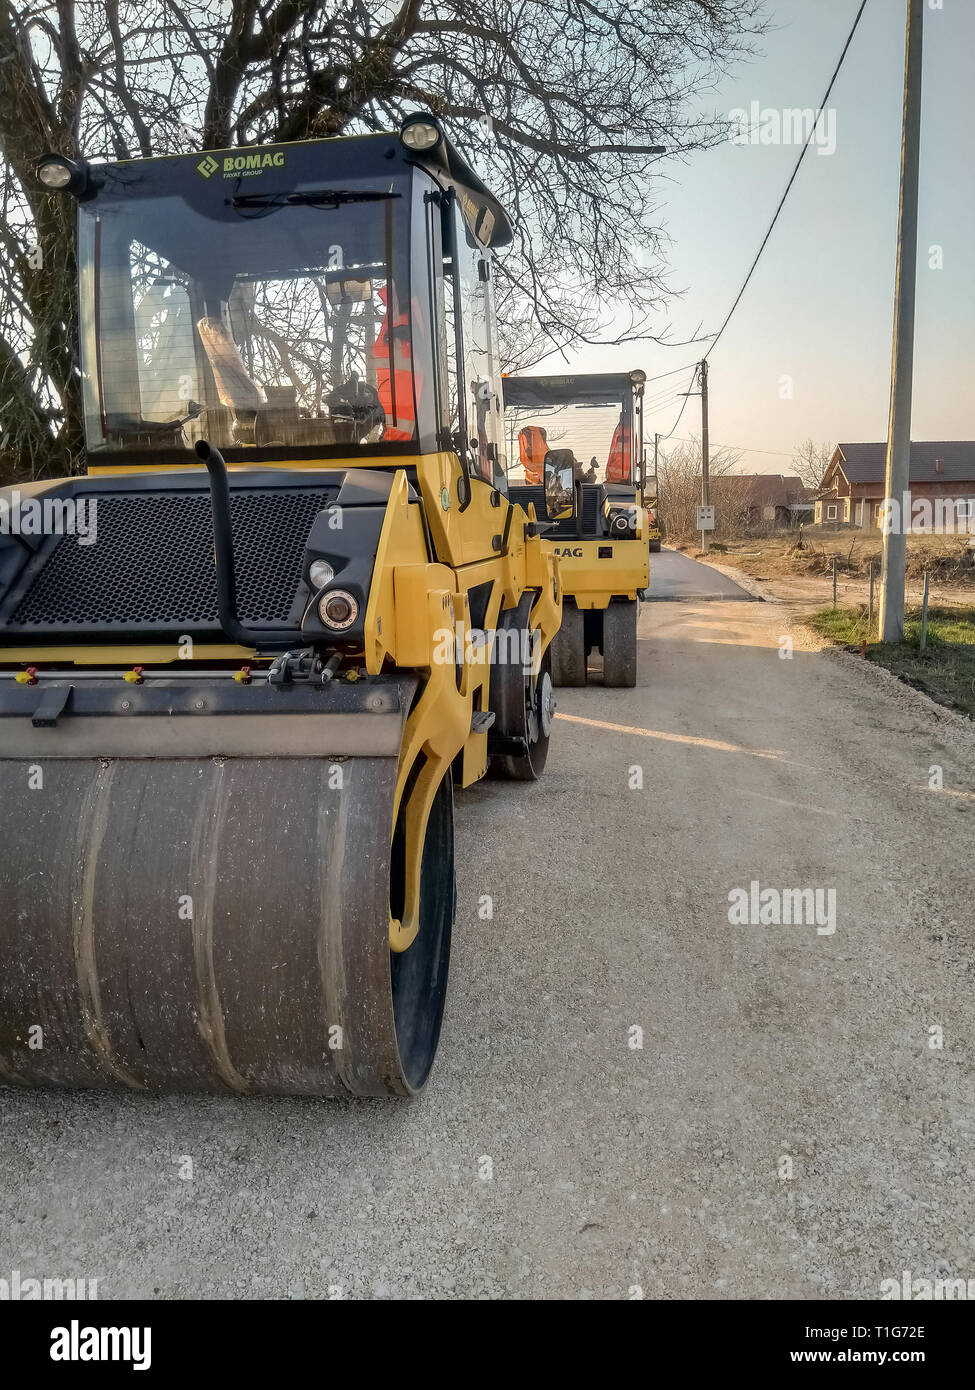 Kladovo, Serbia - March 25, 2019: Asphalting the streets in the city see rollers who are ready to roll asphalt in Kladovo, Serbia Stock Photo